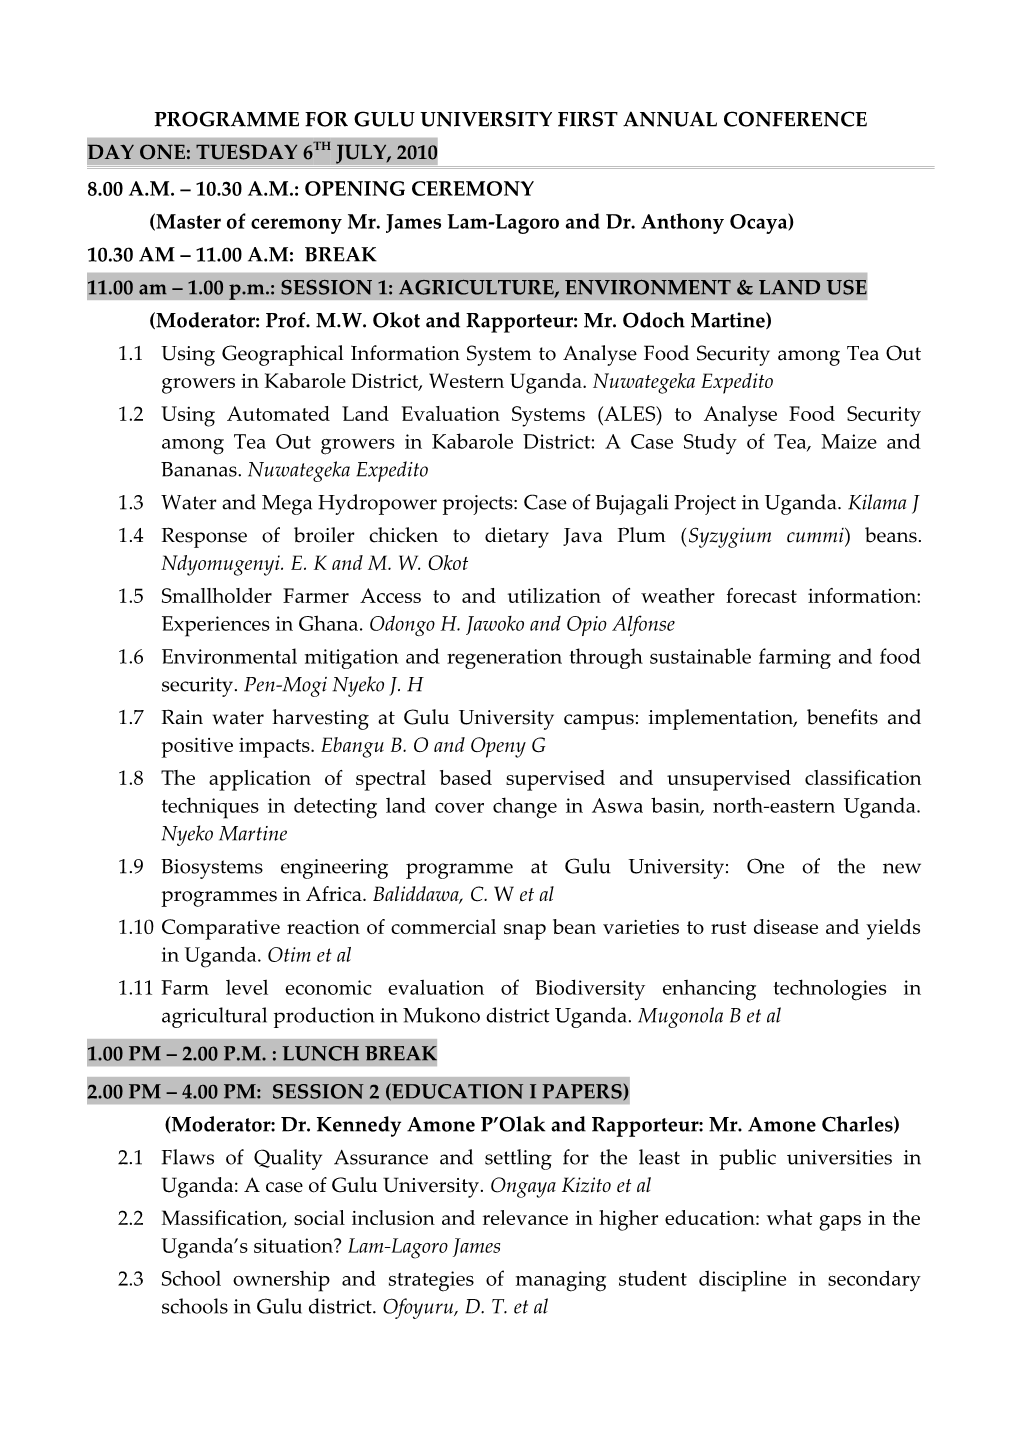 Programme for Gulu University First Annual Conference